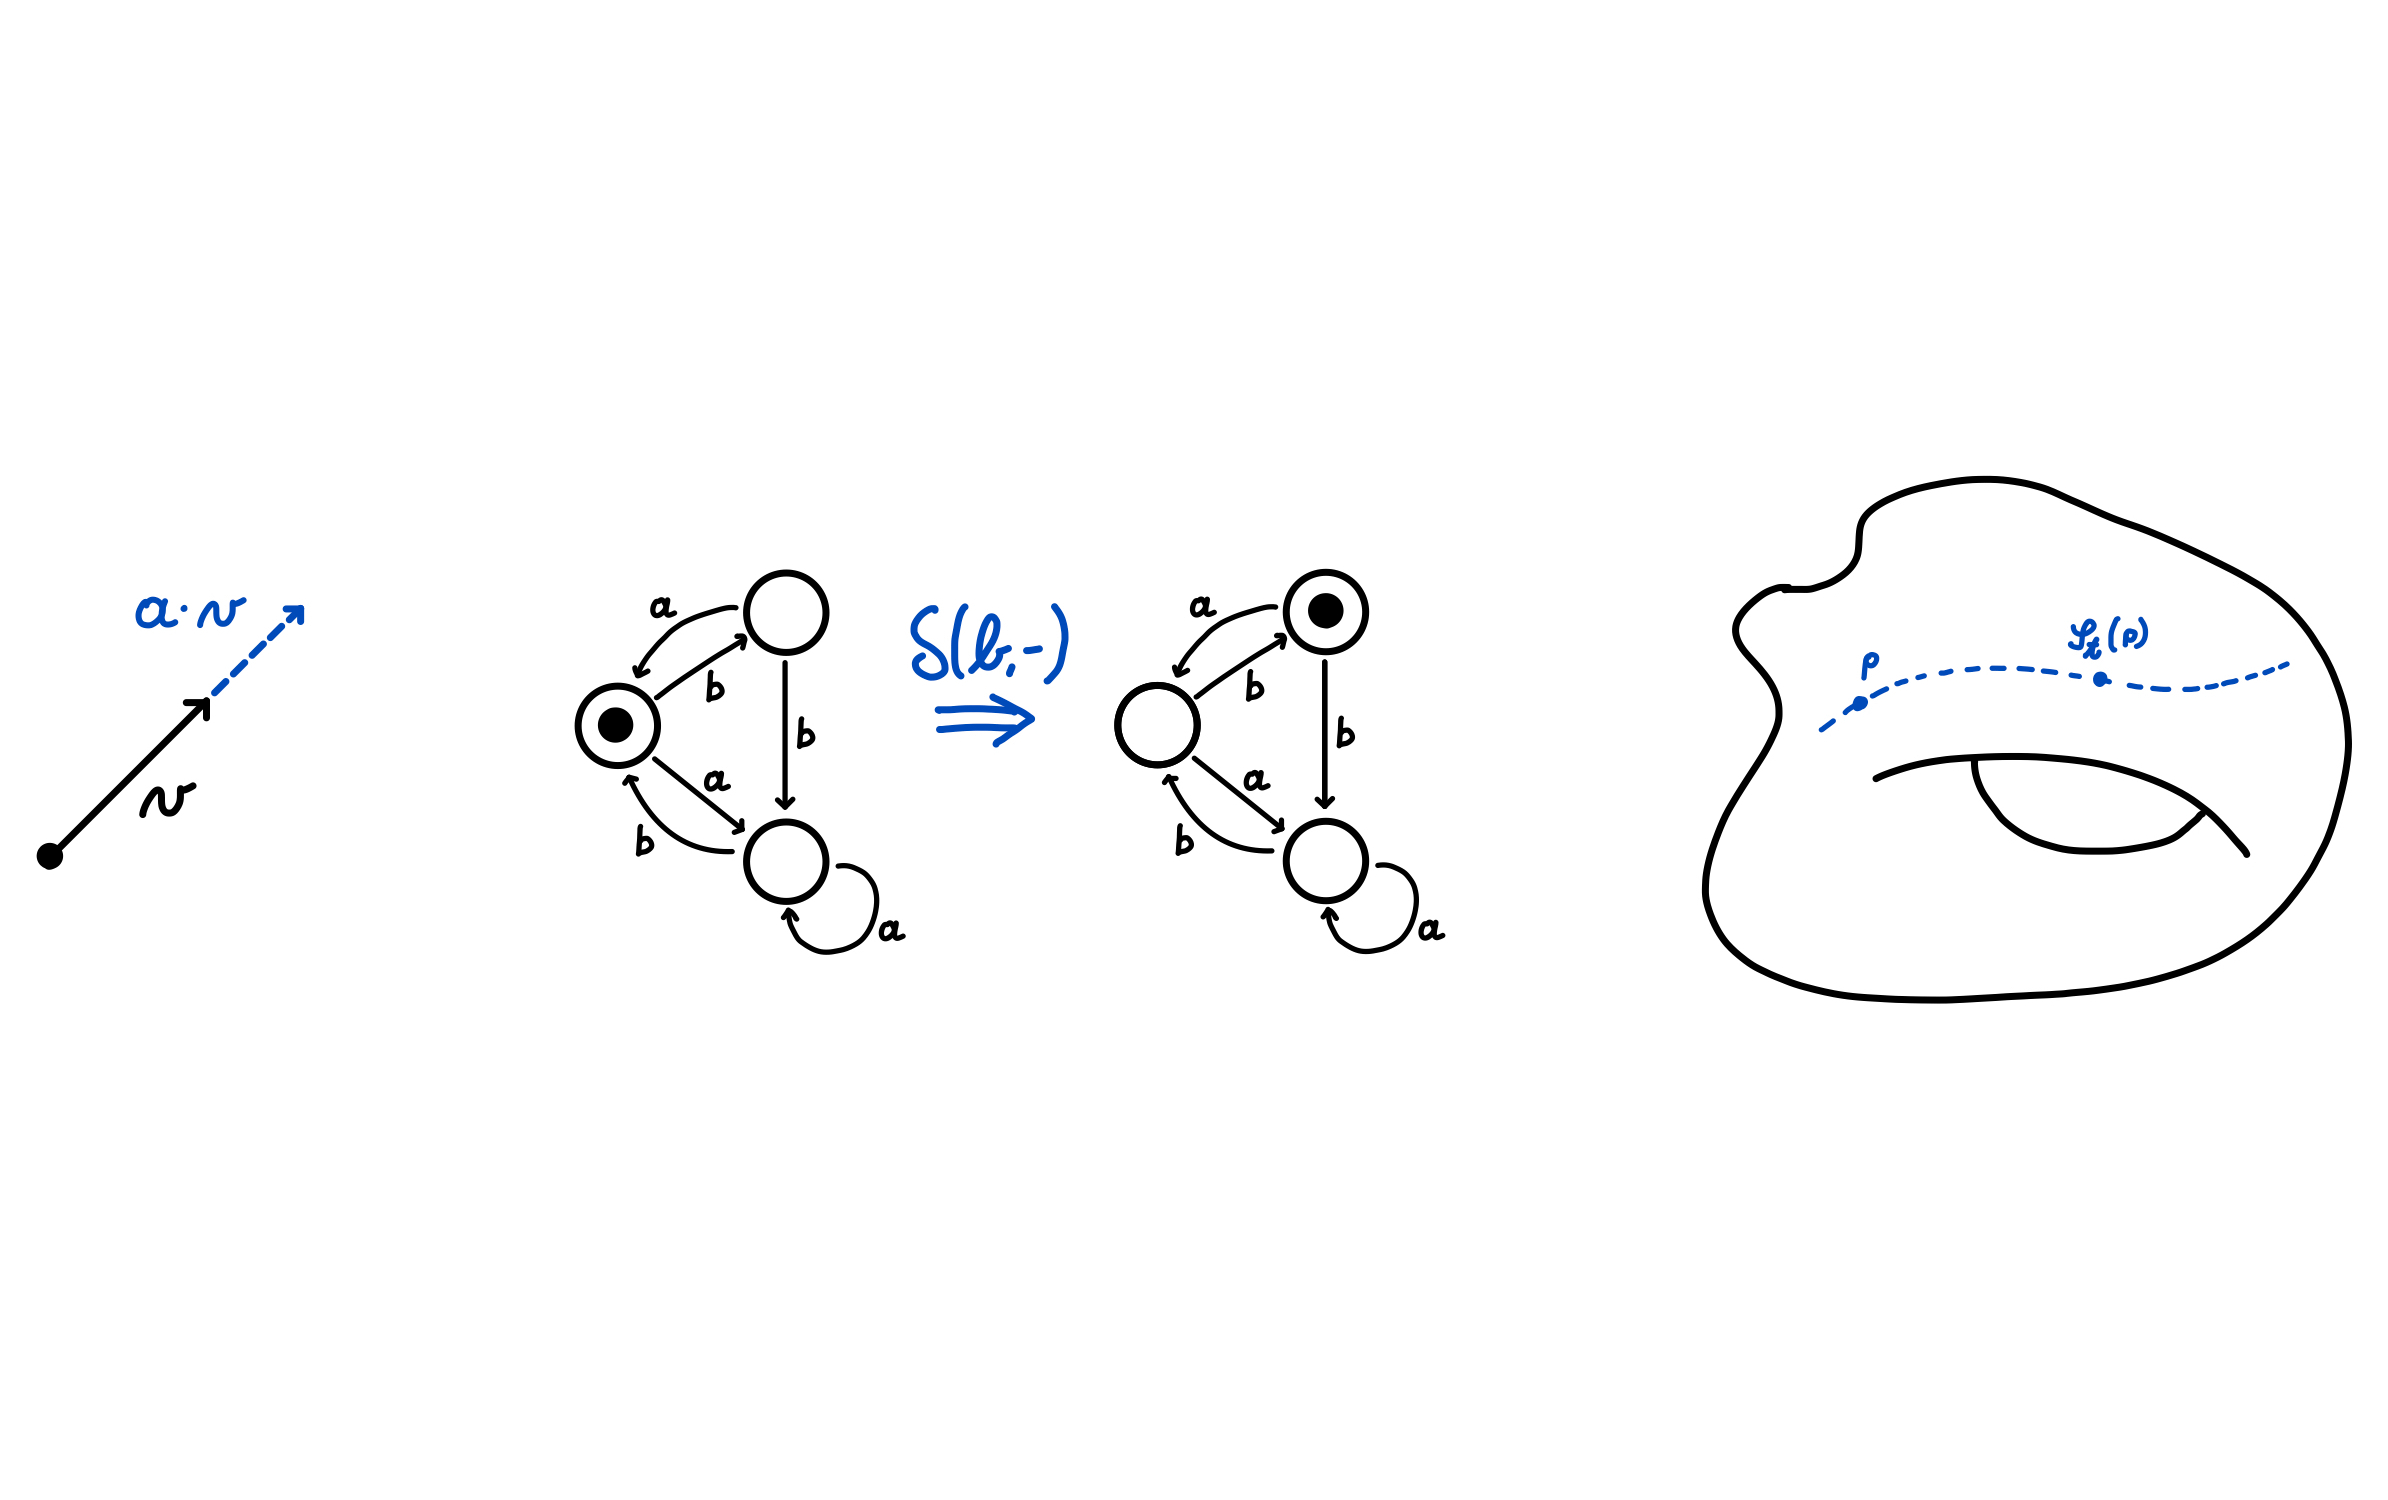 Examples of monoid actions from left to right: scalar multiplication of vectors, automata transitions, trajectories in spaces of configurations.